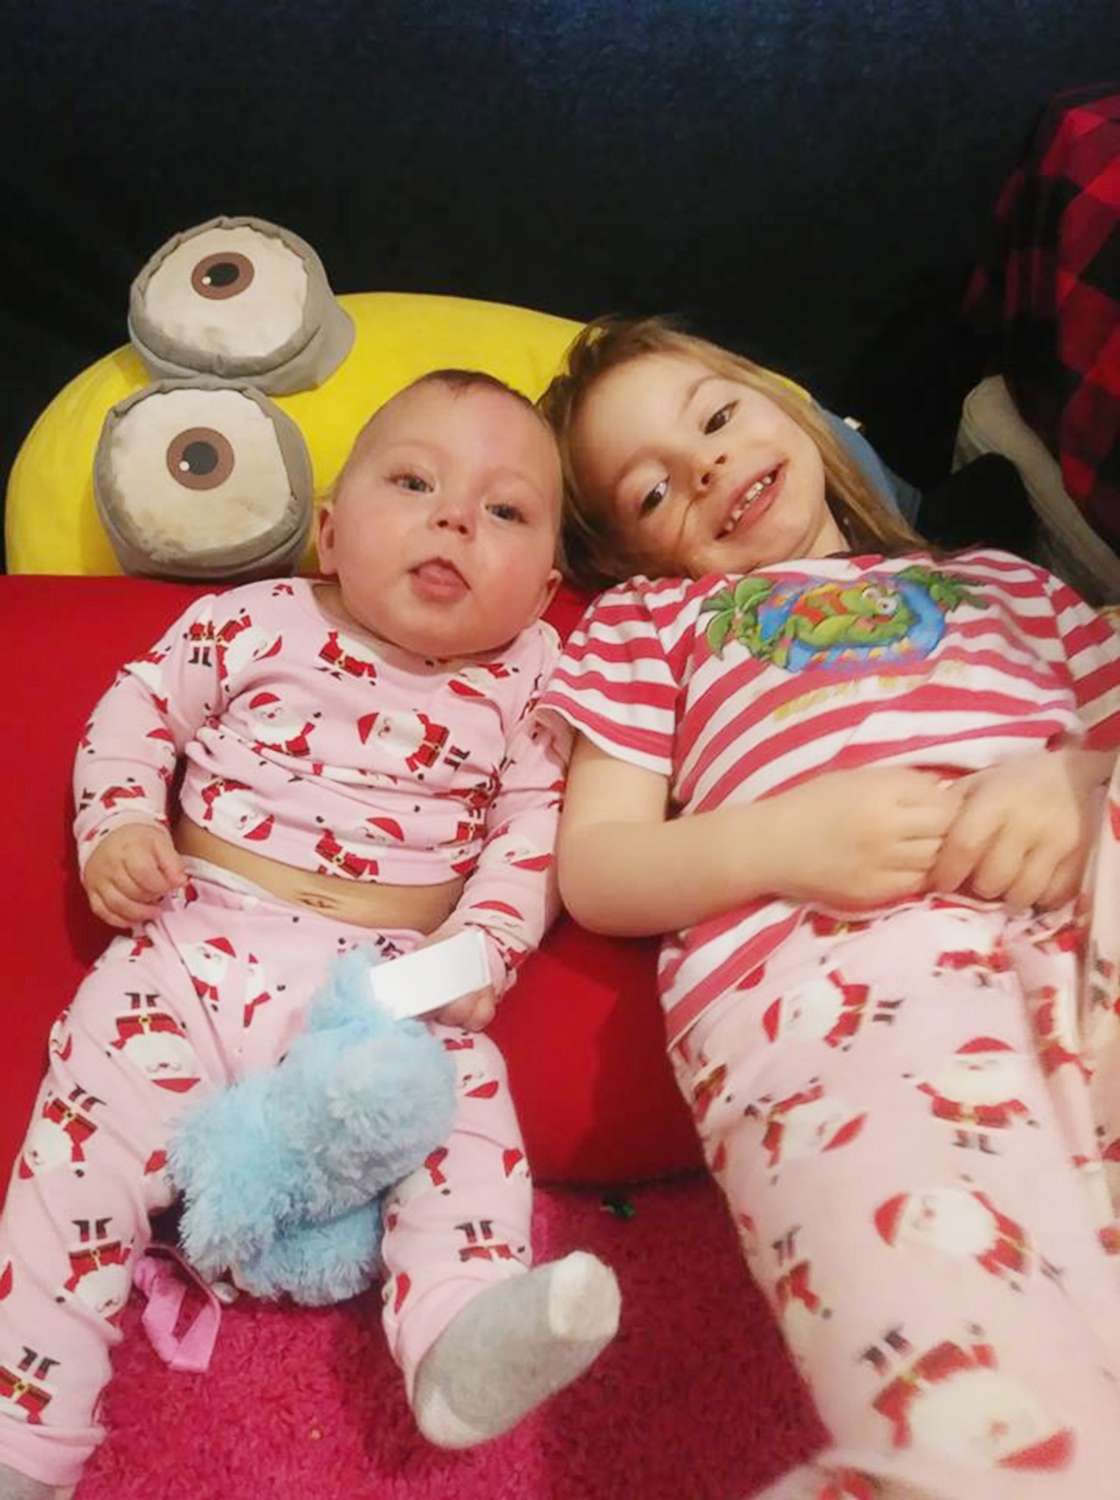 PHOTO: Scarlet Benjamin, 11 months, is seen in an undated family photo with her sister, Halie, 4.